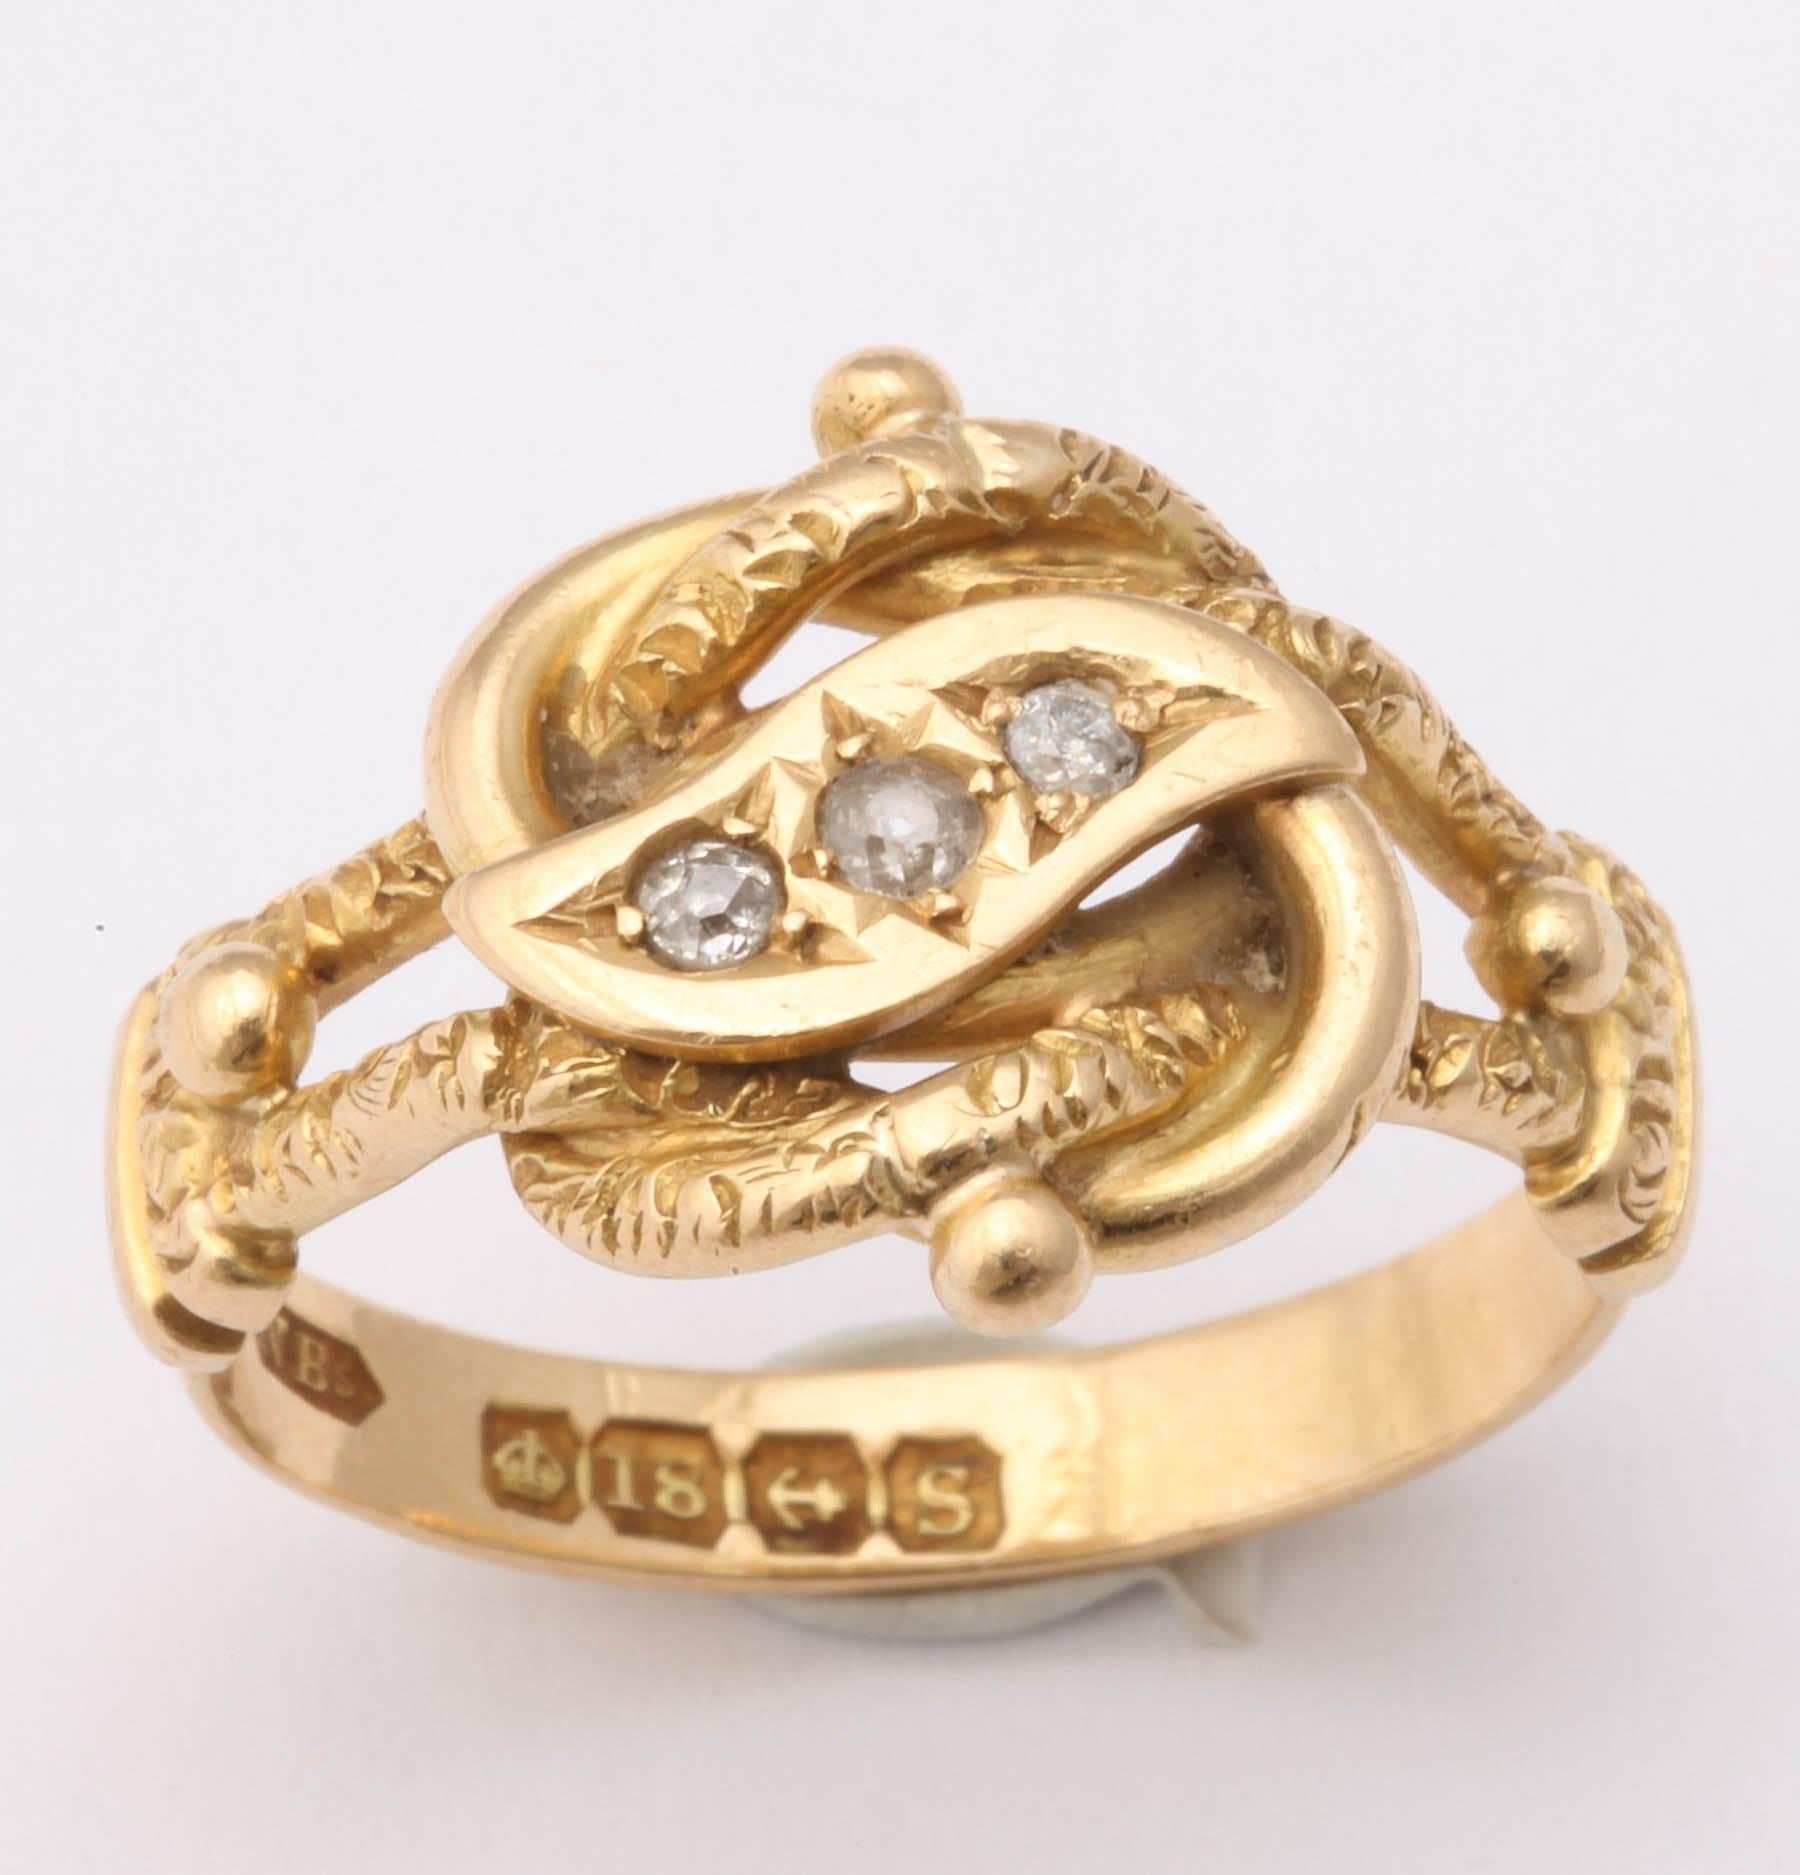  Victorian Lover's Knot Diamond Gold Ring  2